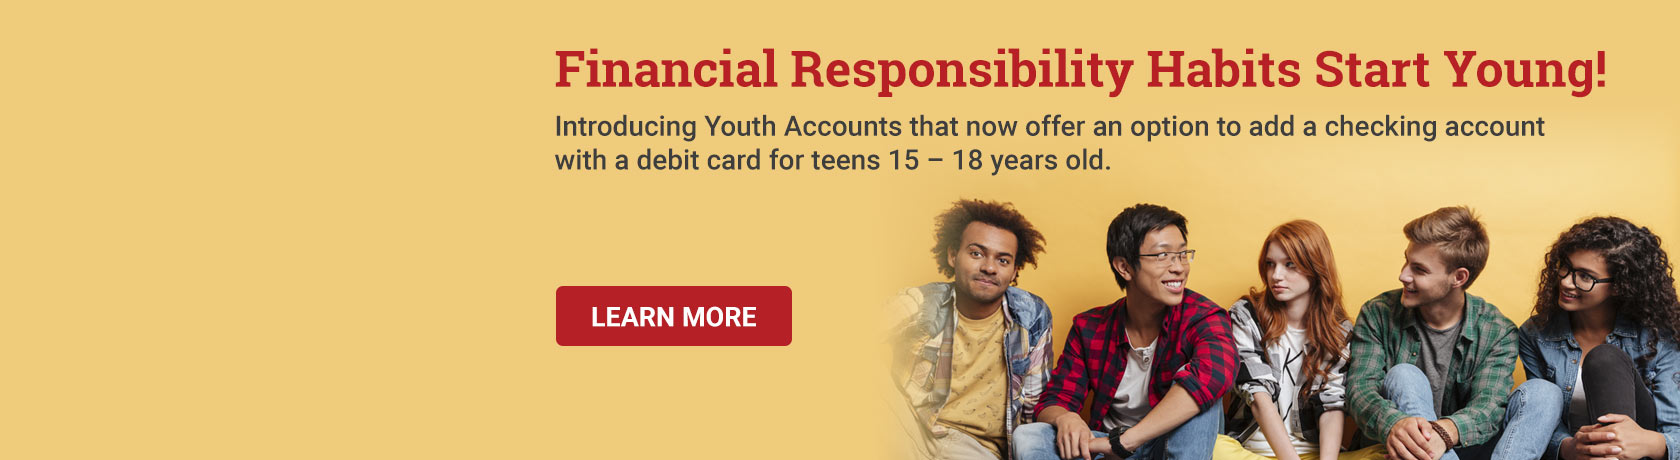 Financial Responsibility Habits Start Young! Introducing Youth Accounts that now offer an option to add a checking account with a debit card for teens 15 – 18 years old.  Learn More.